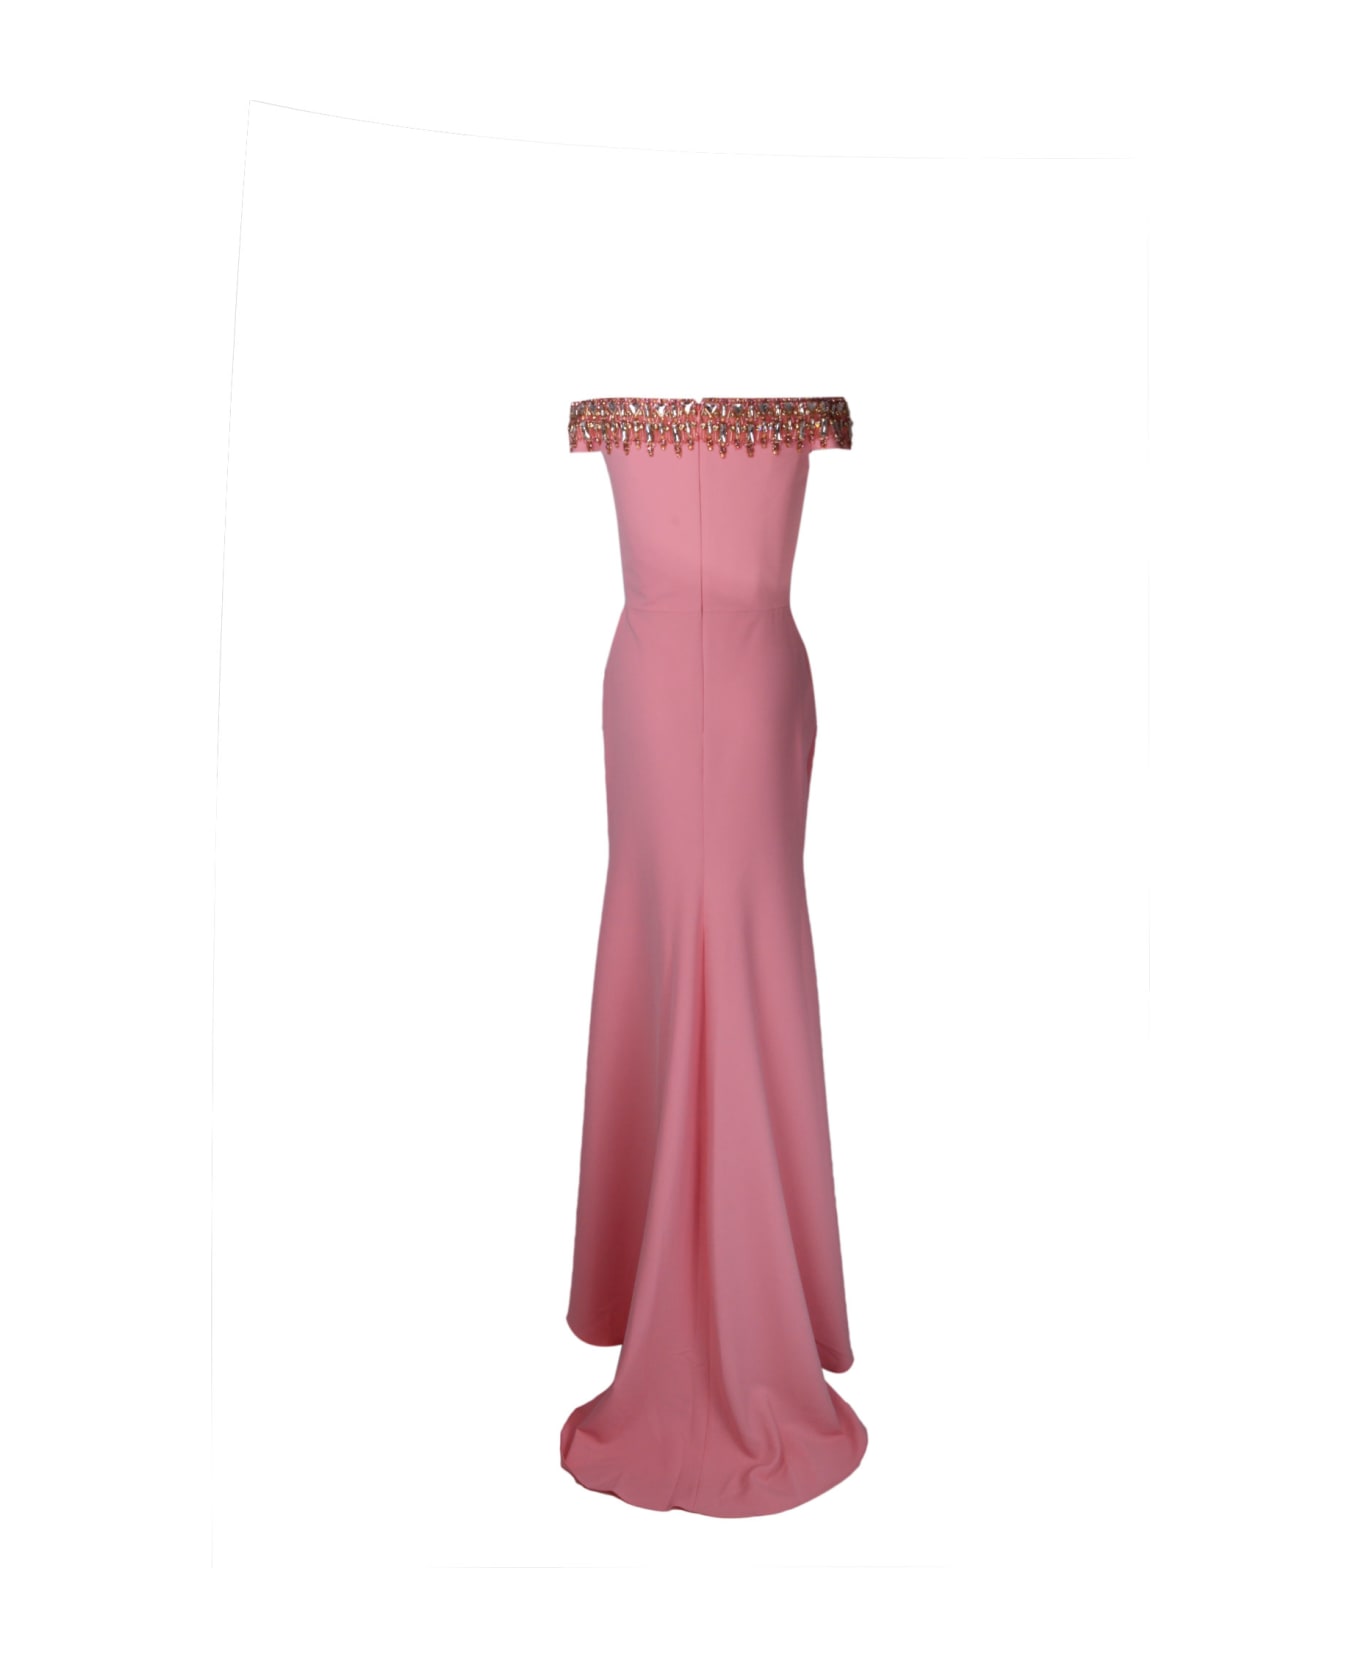 Jenny Packham Dress With Crystals - Pink